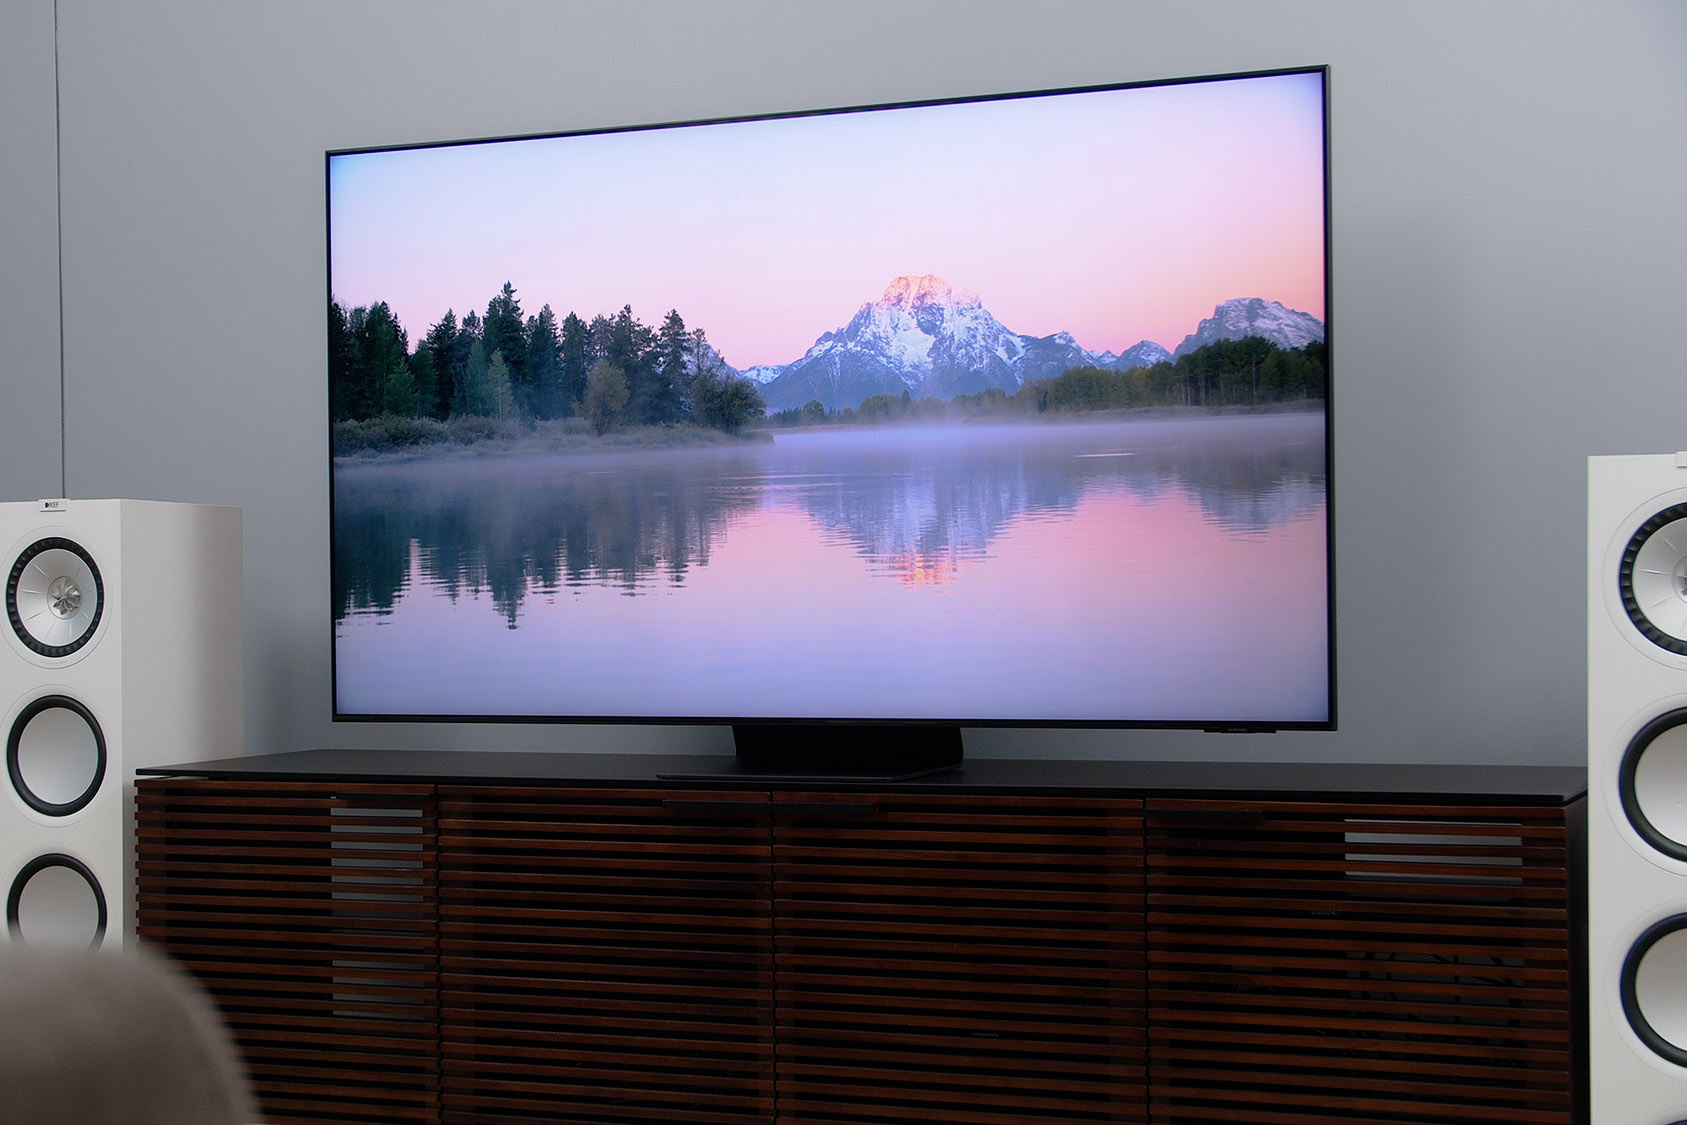 The Samsung QN90A TV in a living room.